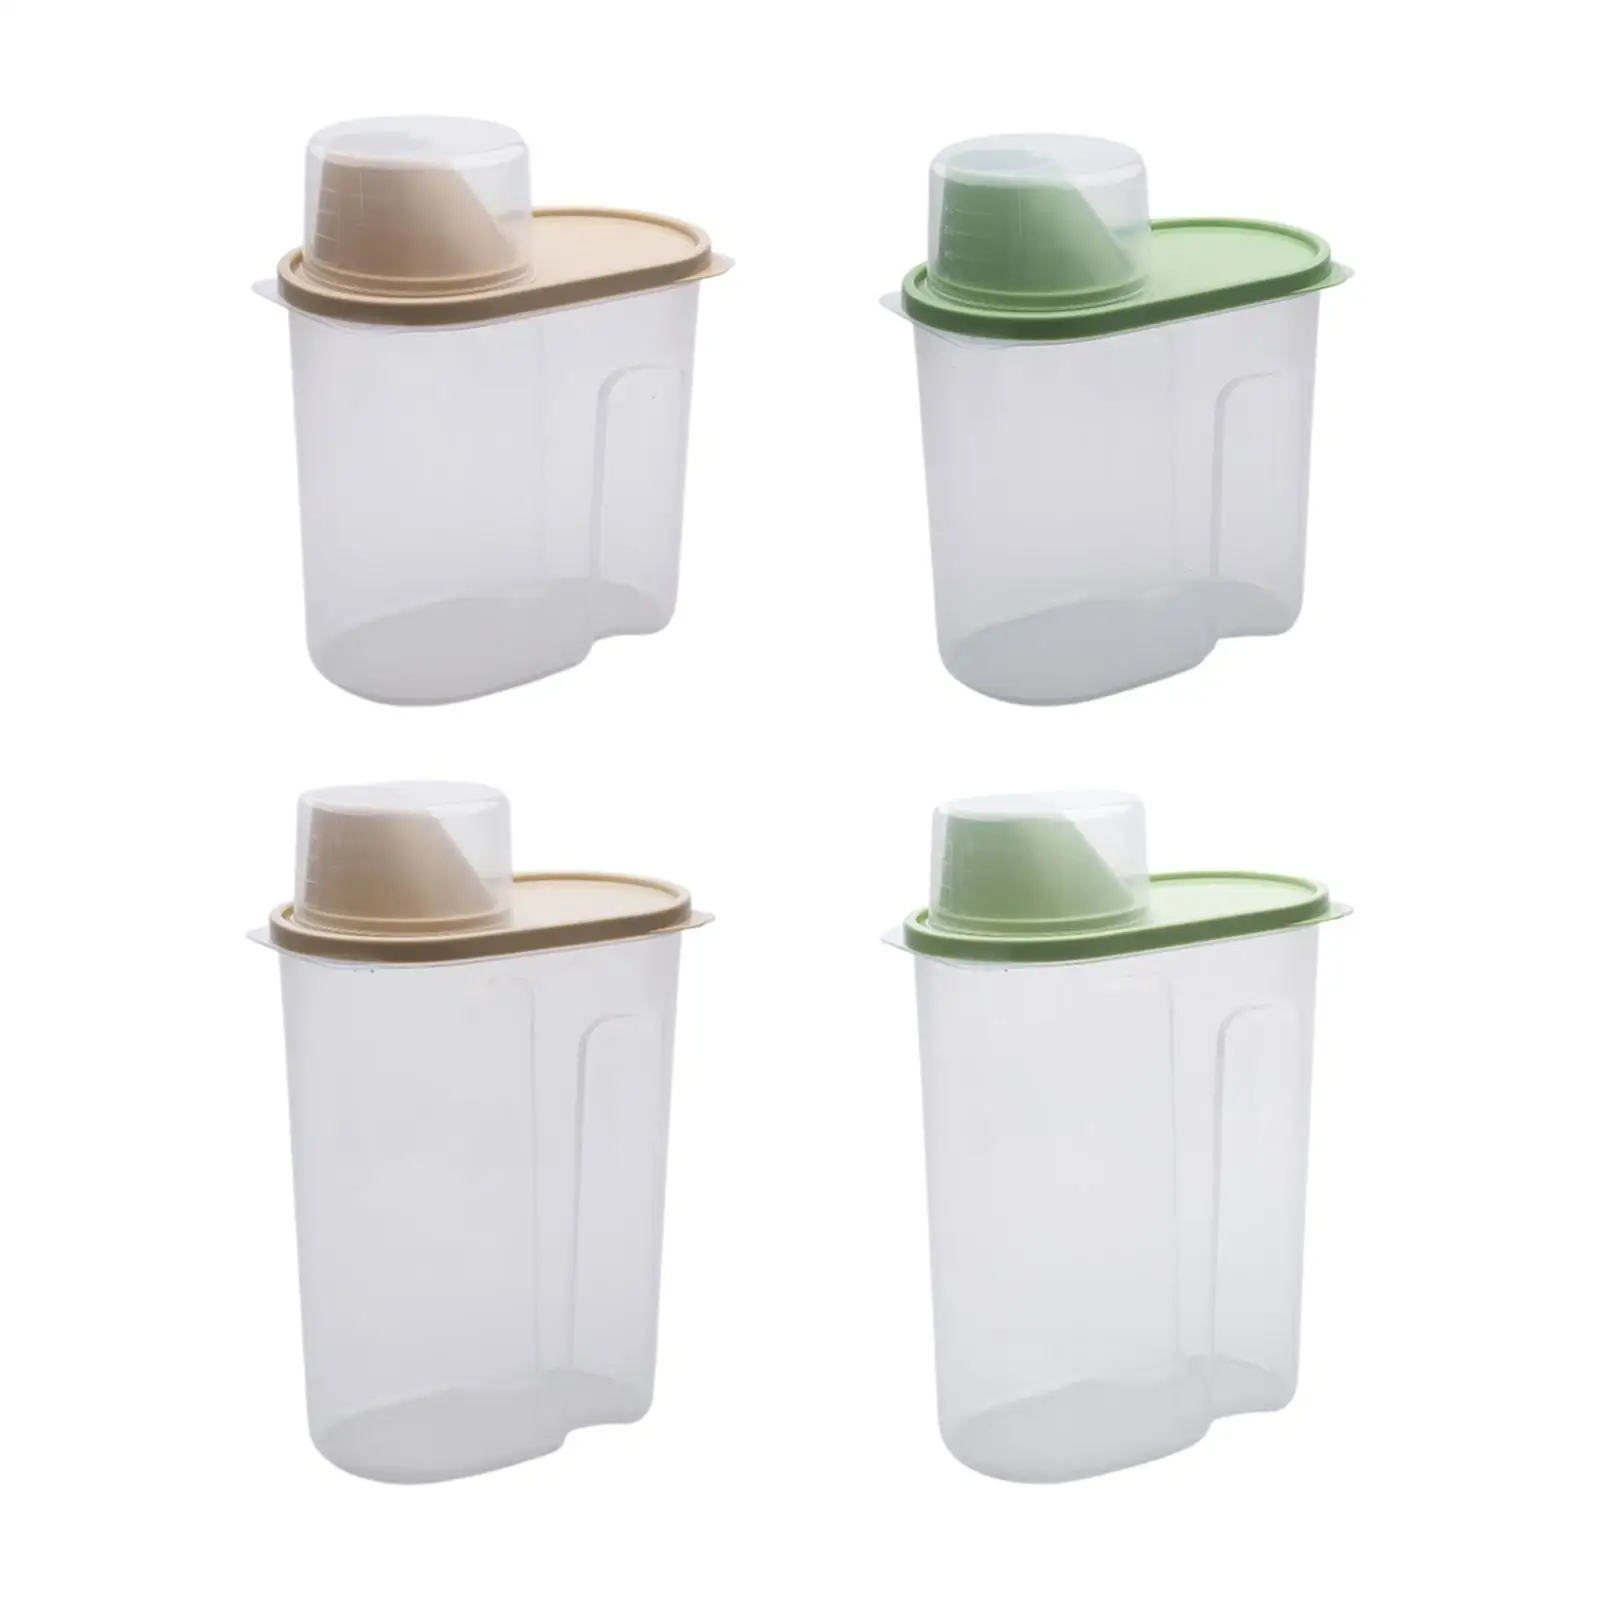 Cereal Storage Containers Kitchen Organization Pasta Containers for Grain